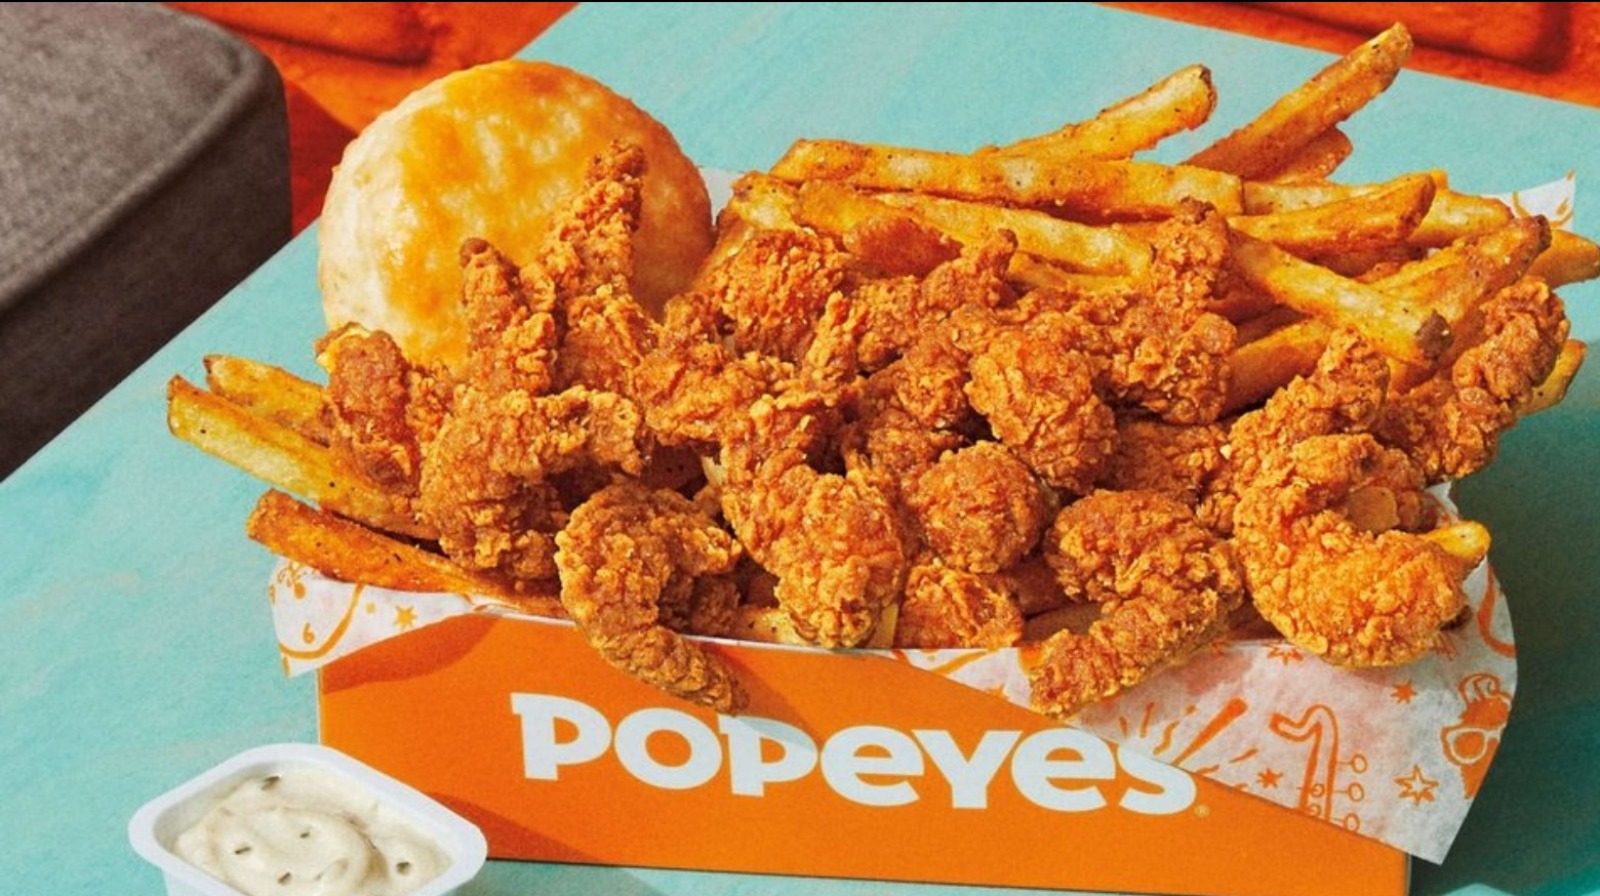 What You Should Know About Popeyes' New Twisty Wicked Shrimp